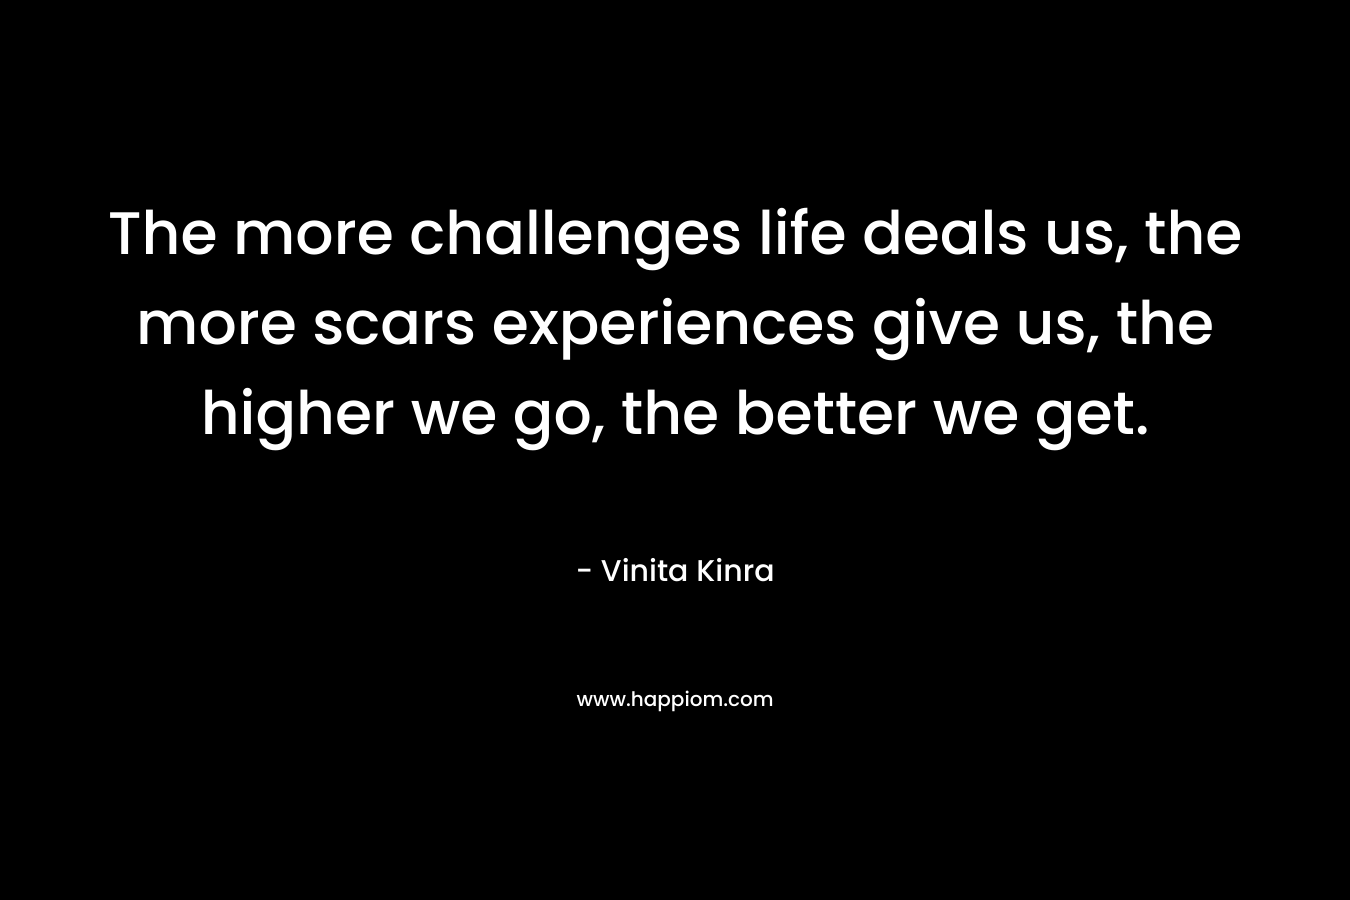 The more challenges life deals us, the more scars experiences give us, the higher we go, the better we get. – Vinita Kinra